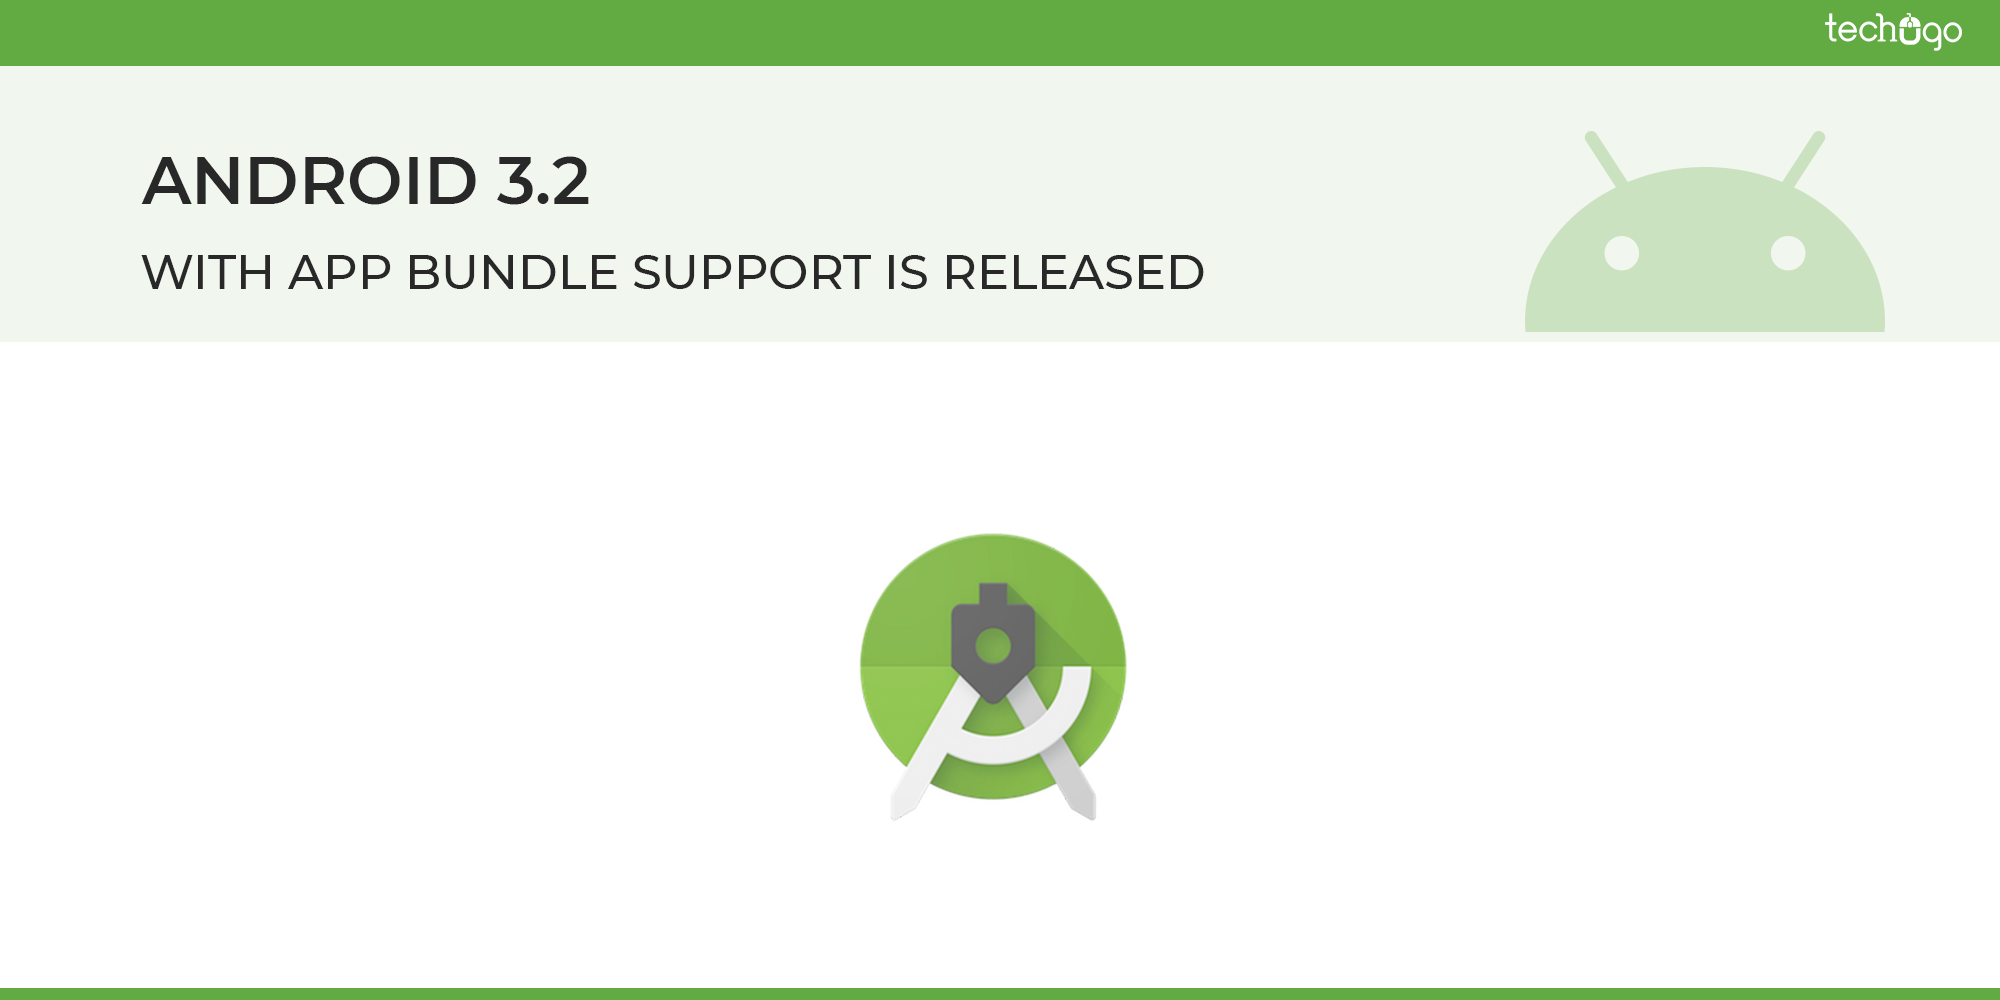 Android 3.2 With App Bundle Support Is Released